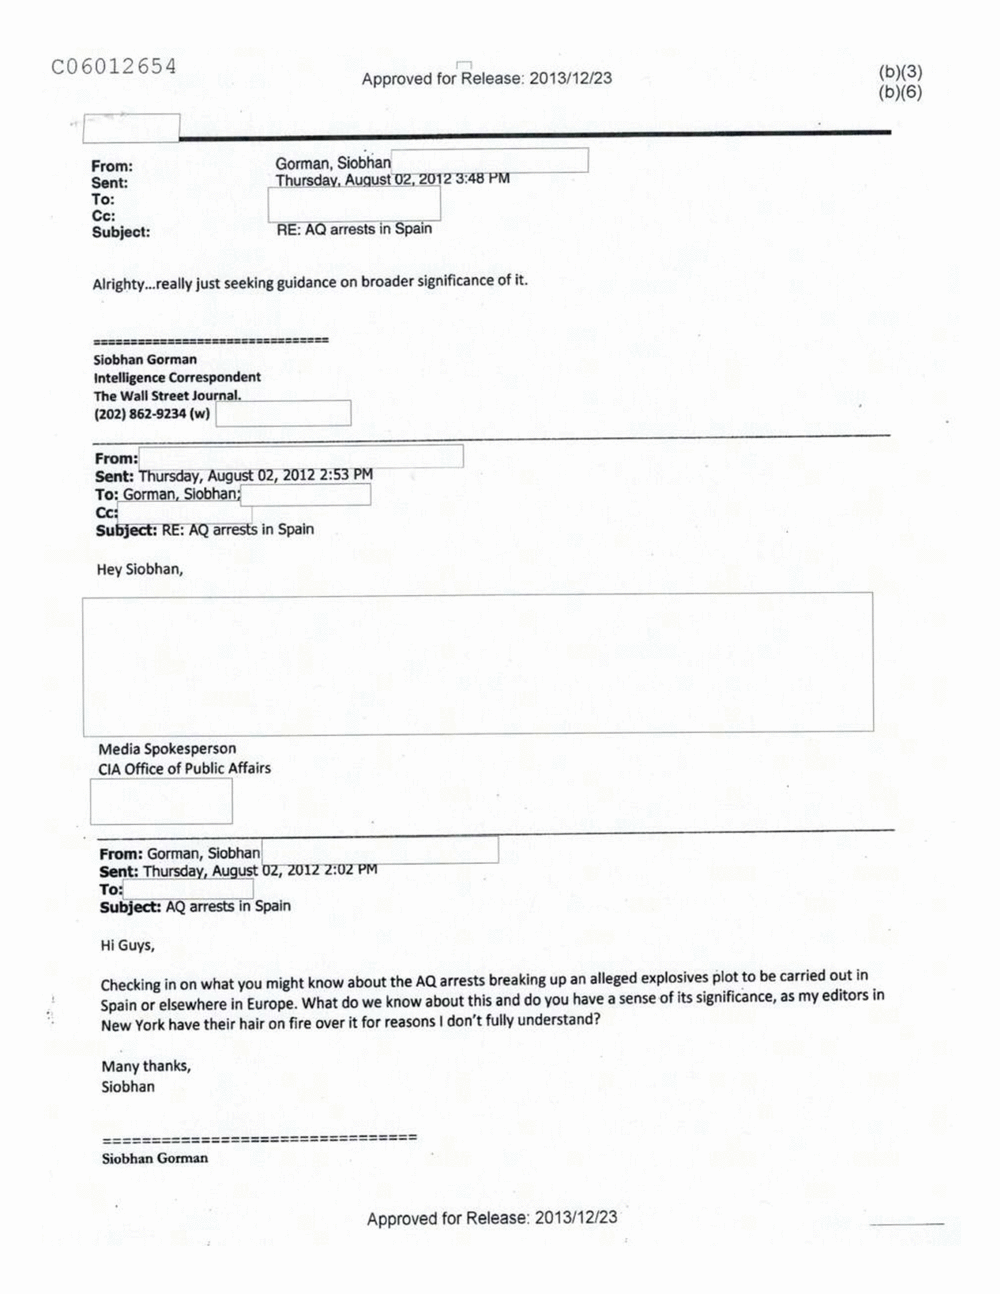 Page 230 from Email Correspondence Between Reporters and CIA Flacks